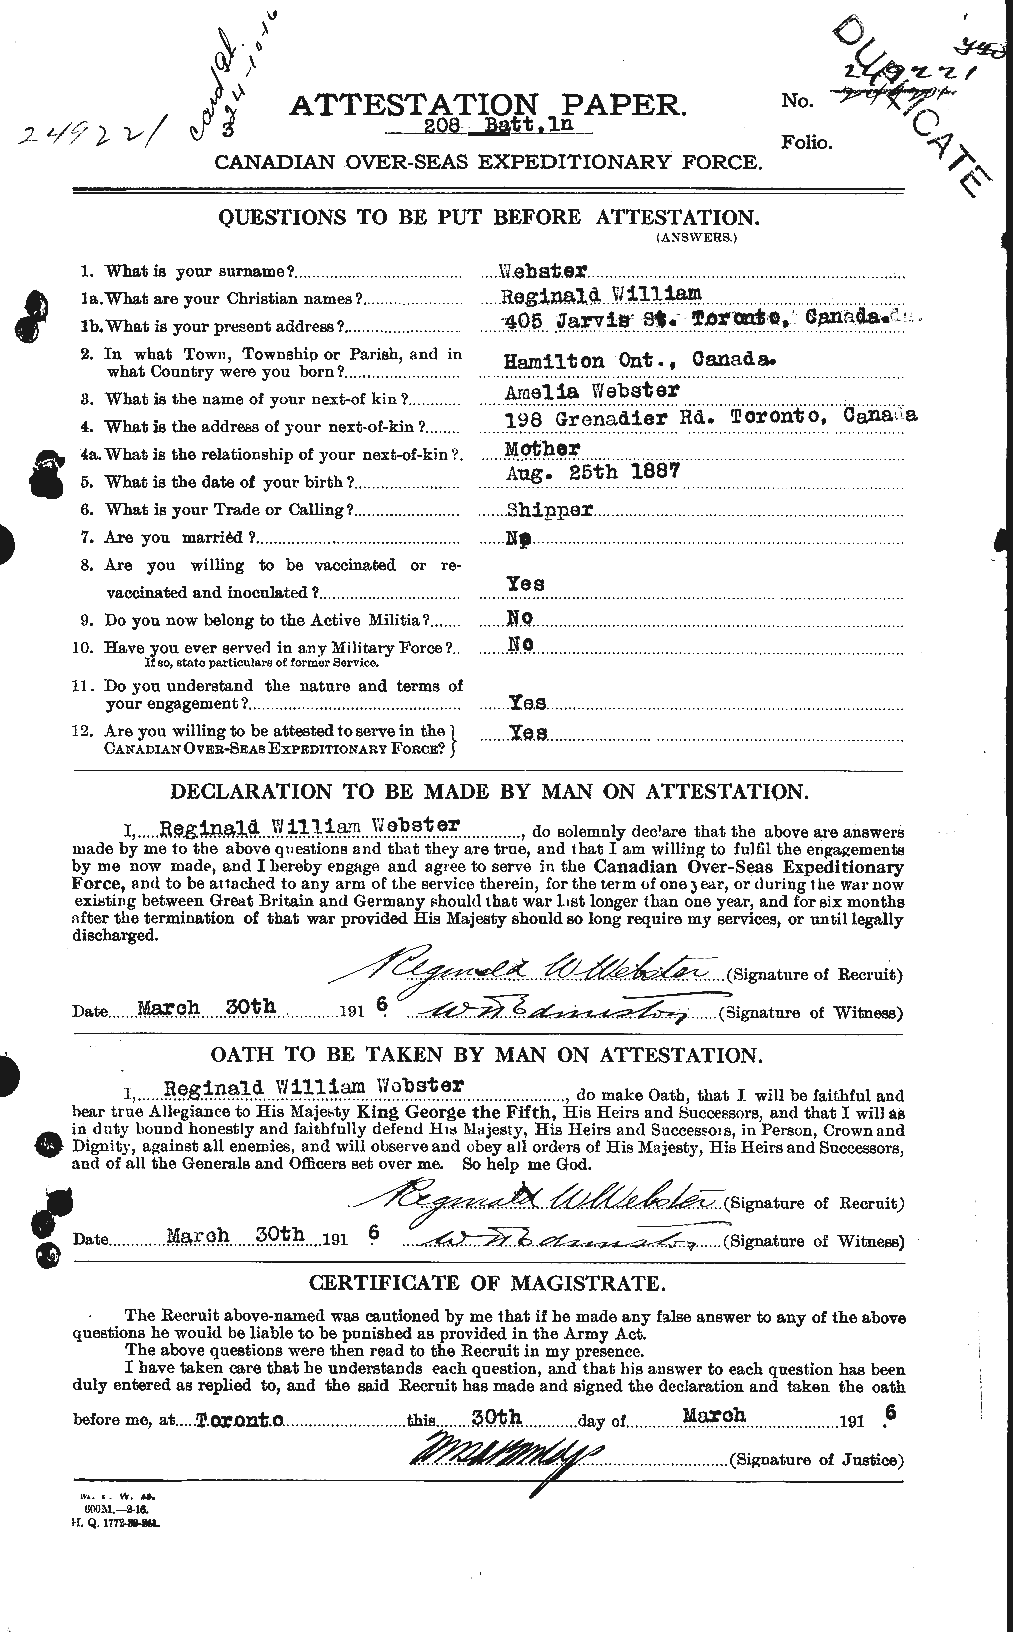 Personnel Records of the First World War - CEF 670538a